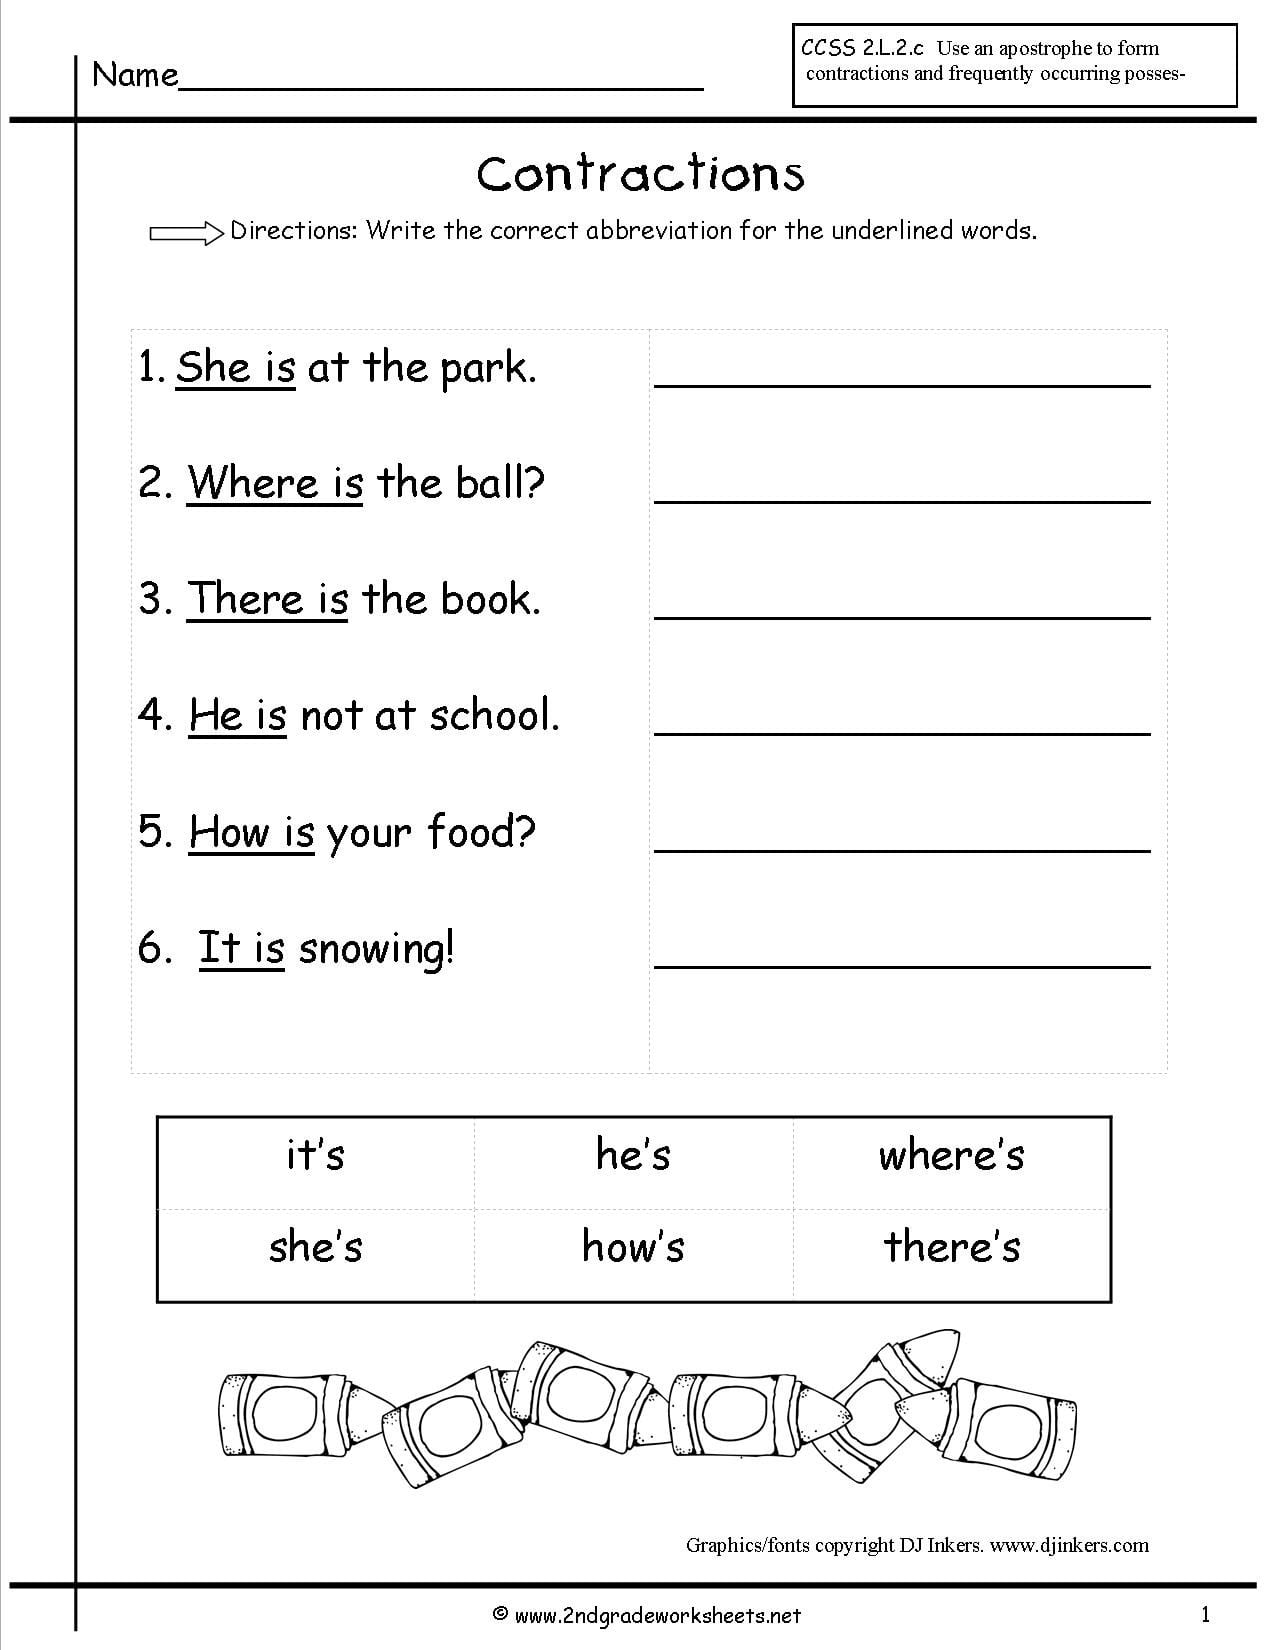 Contractions Worksheet Pdf Db excel